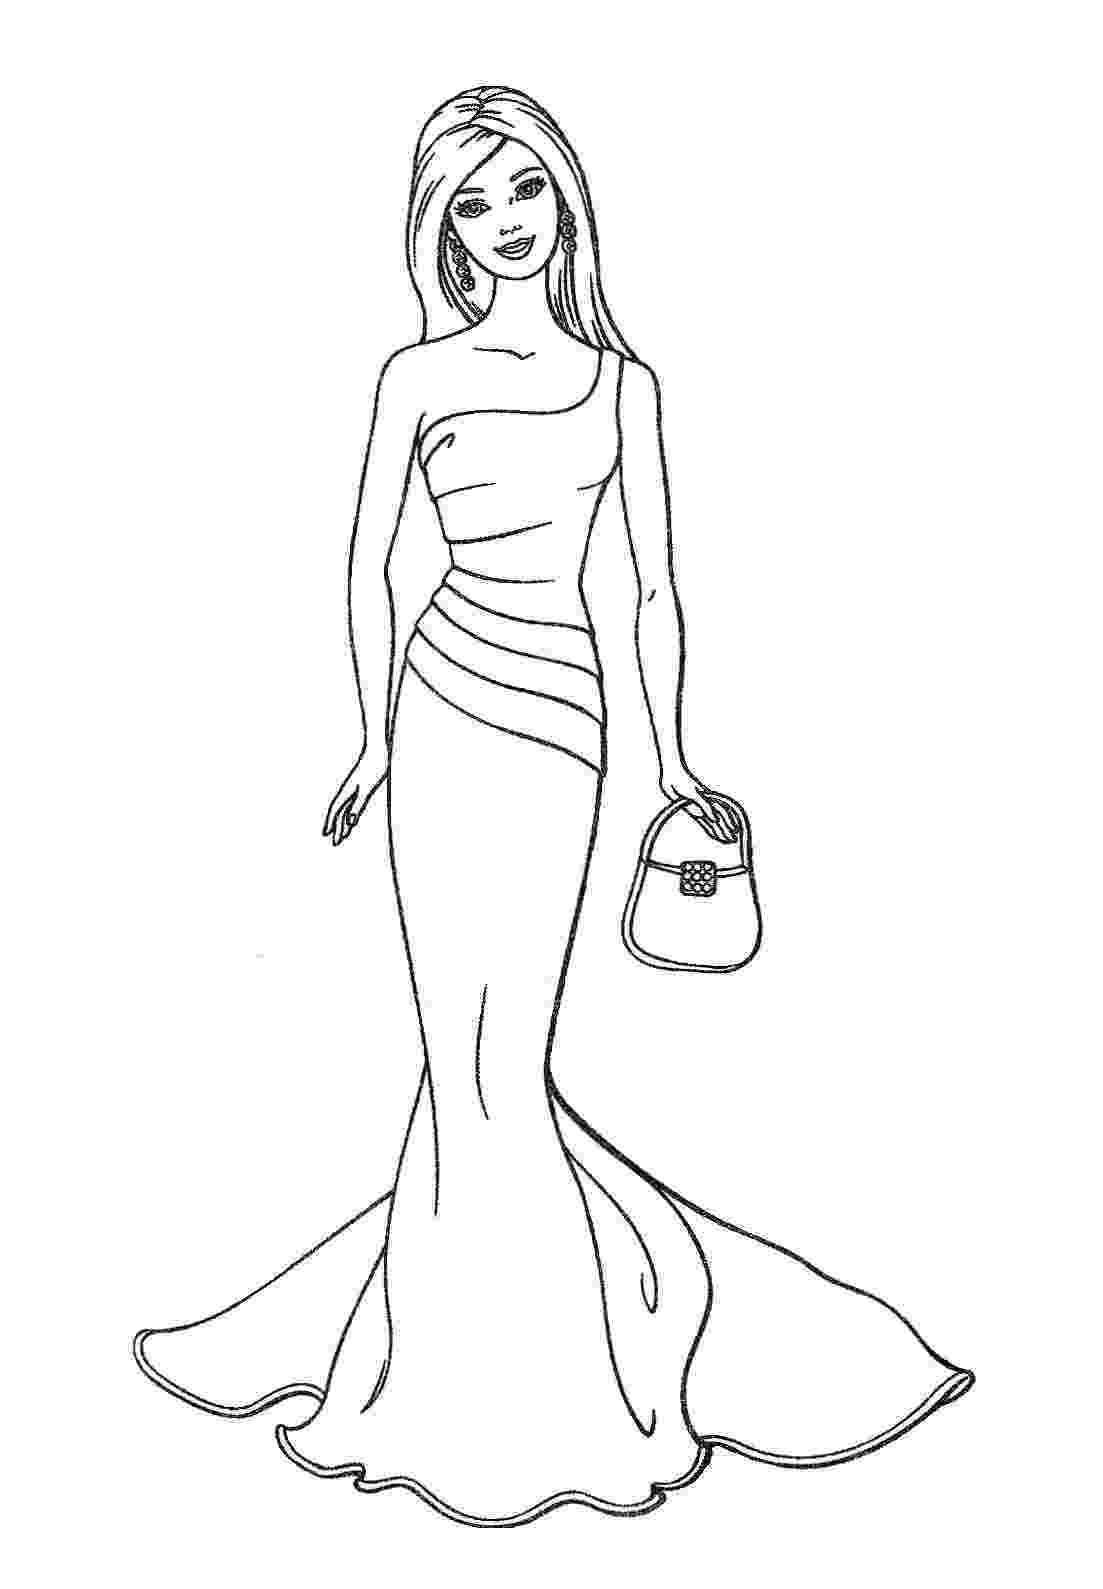 pictures of barbie for colouring barbie coloring pages coloring pages of barbie with kelly of pictures colouring barbie for 